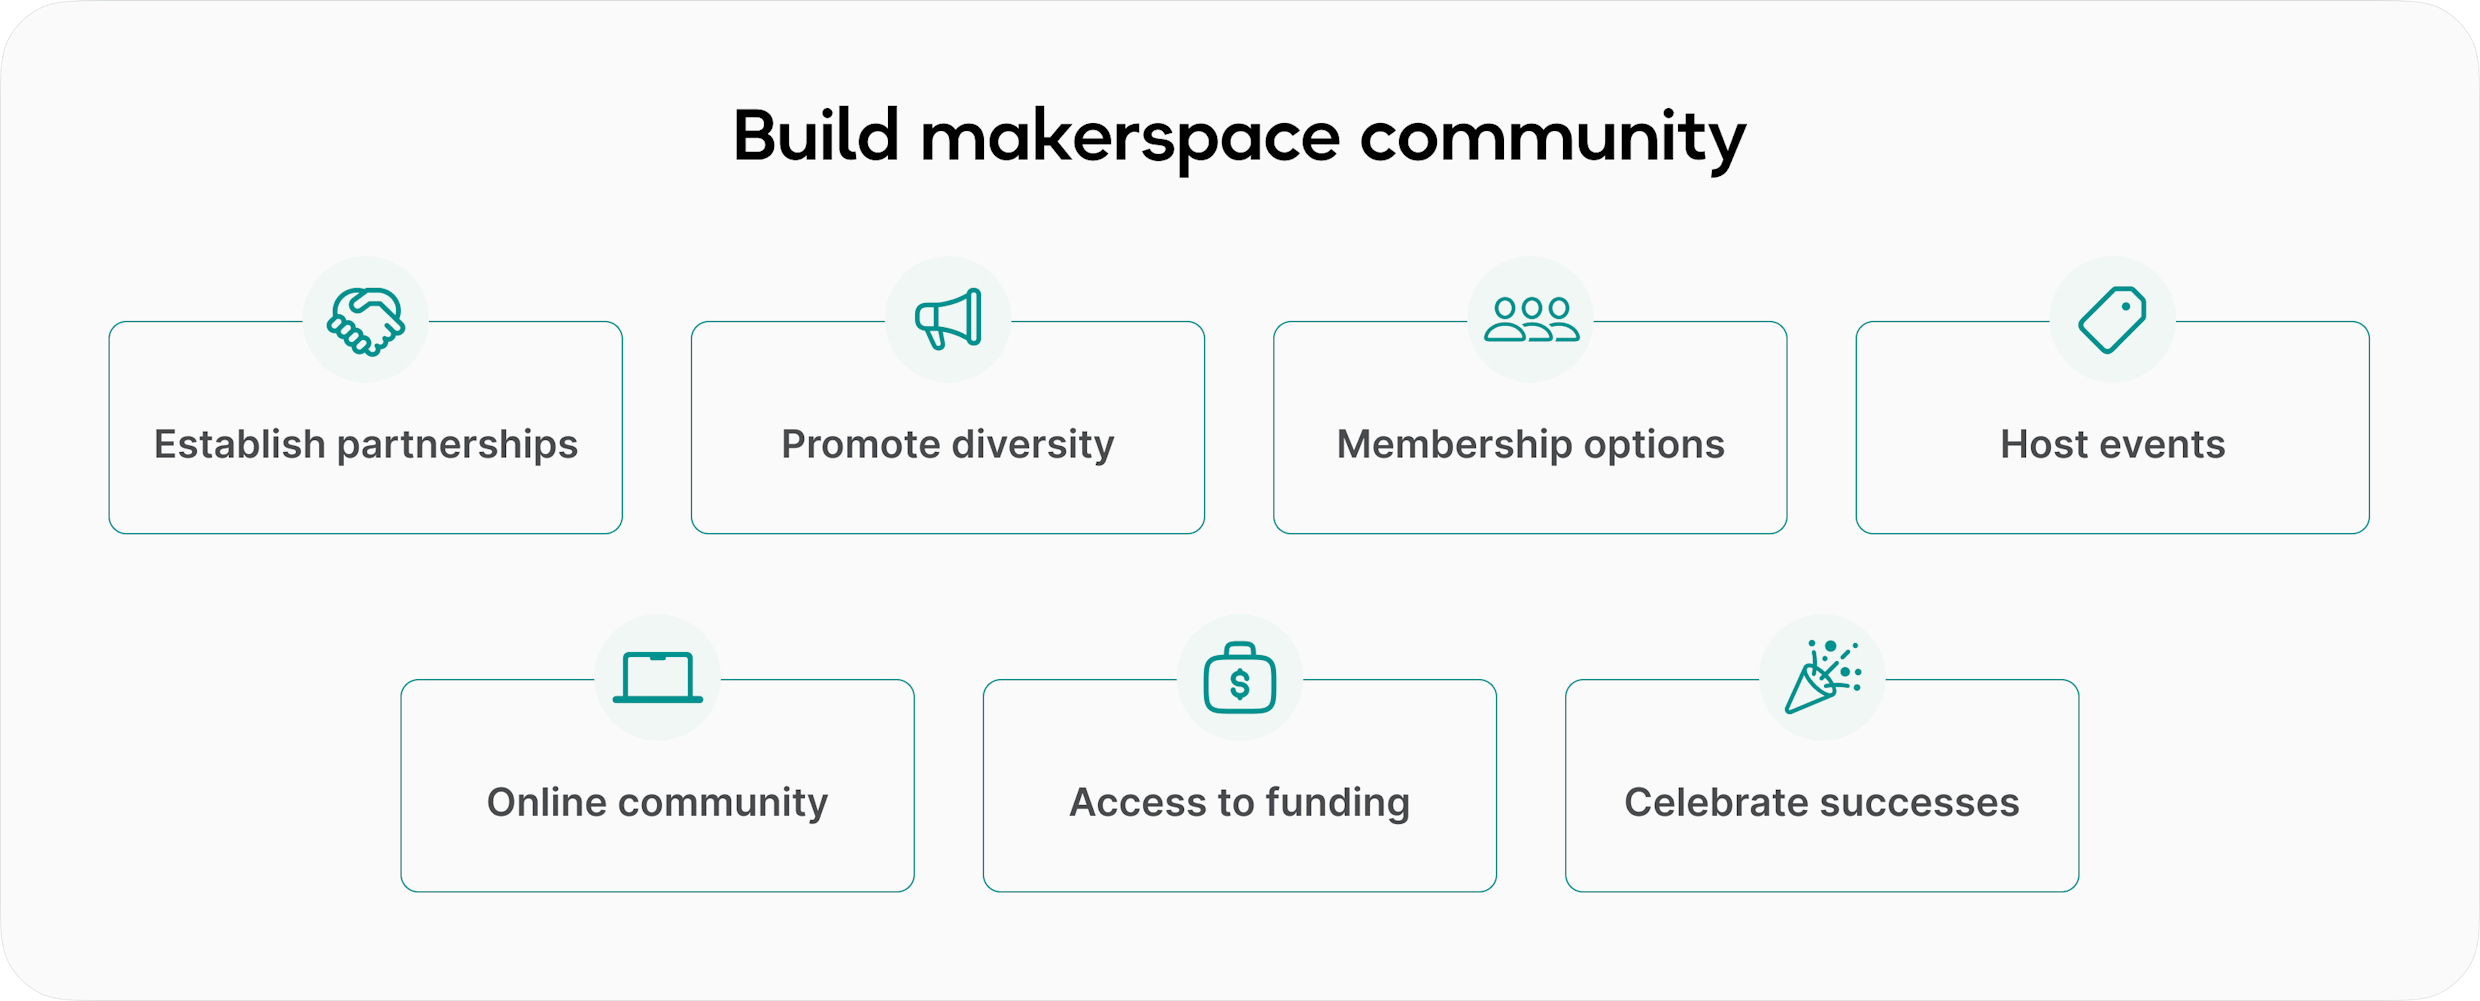 How to build makerspace community